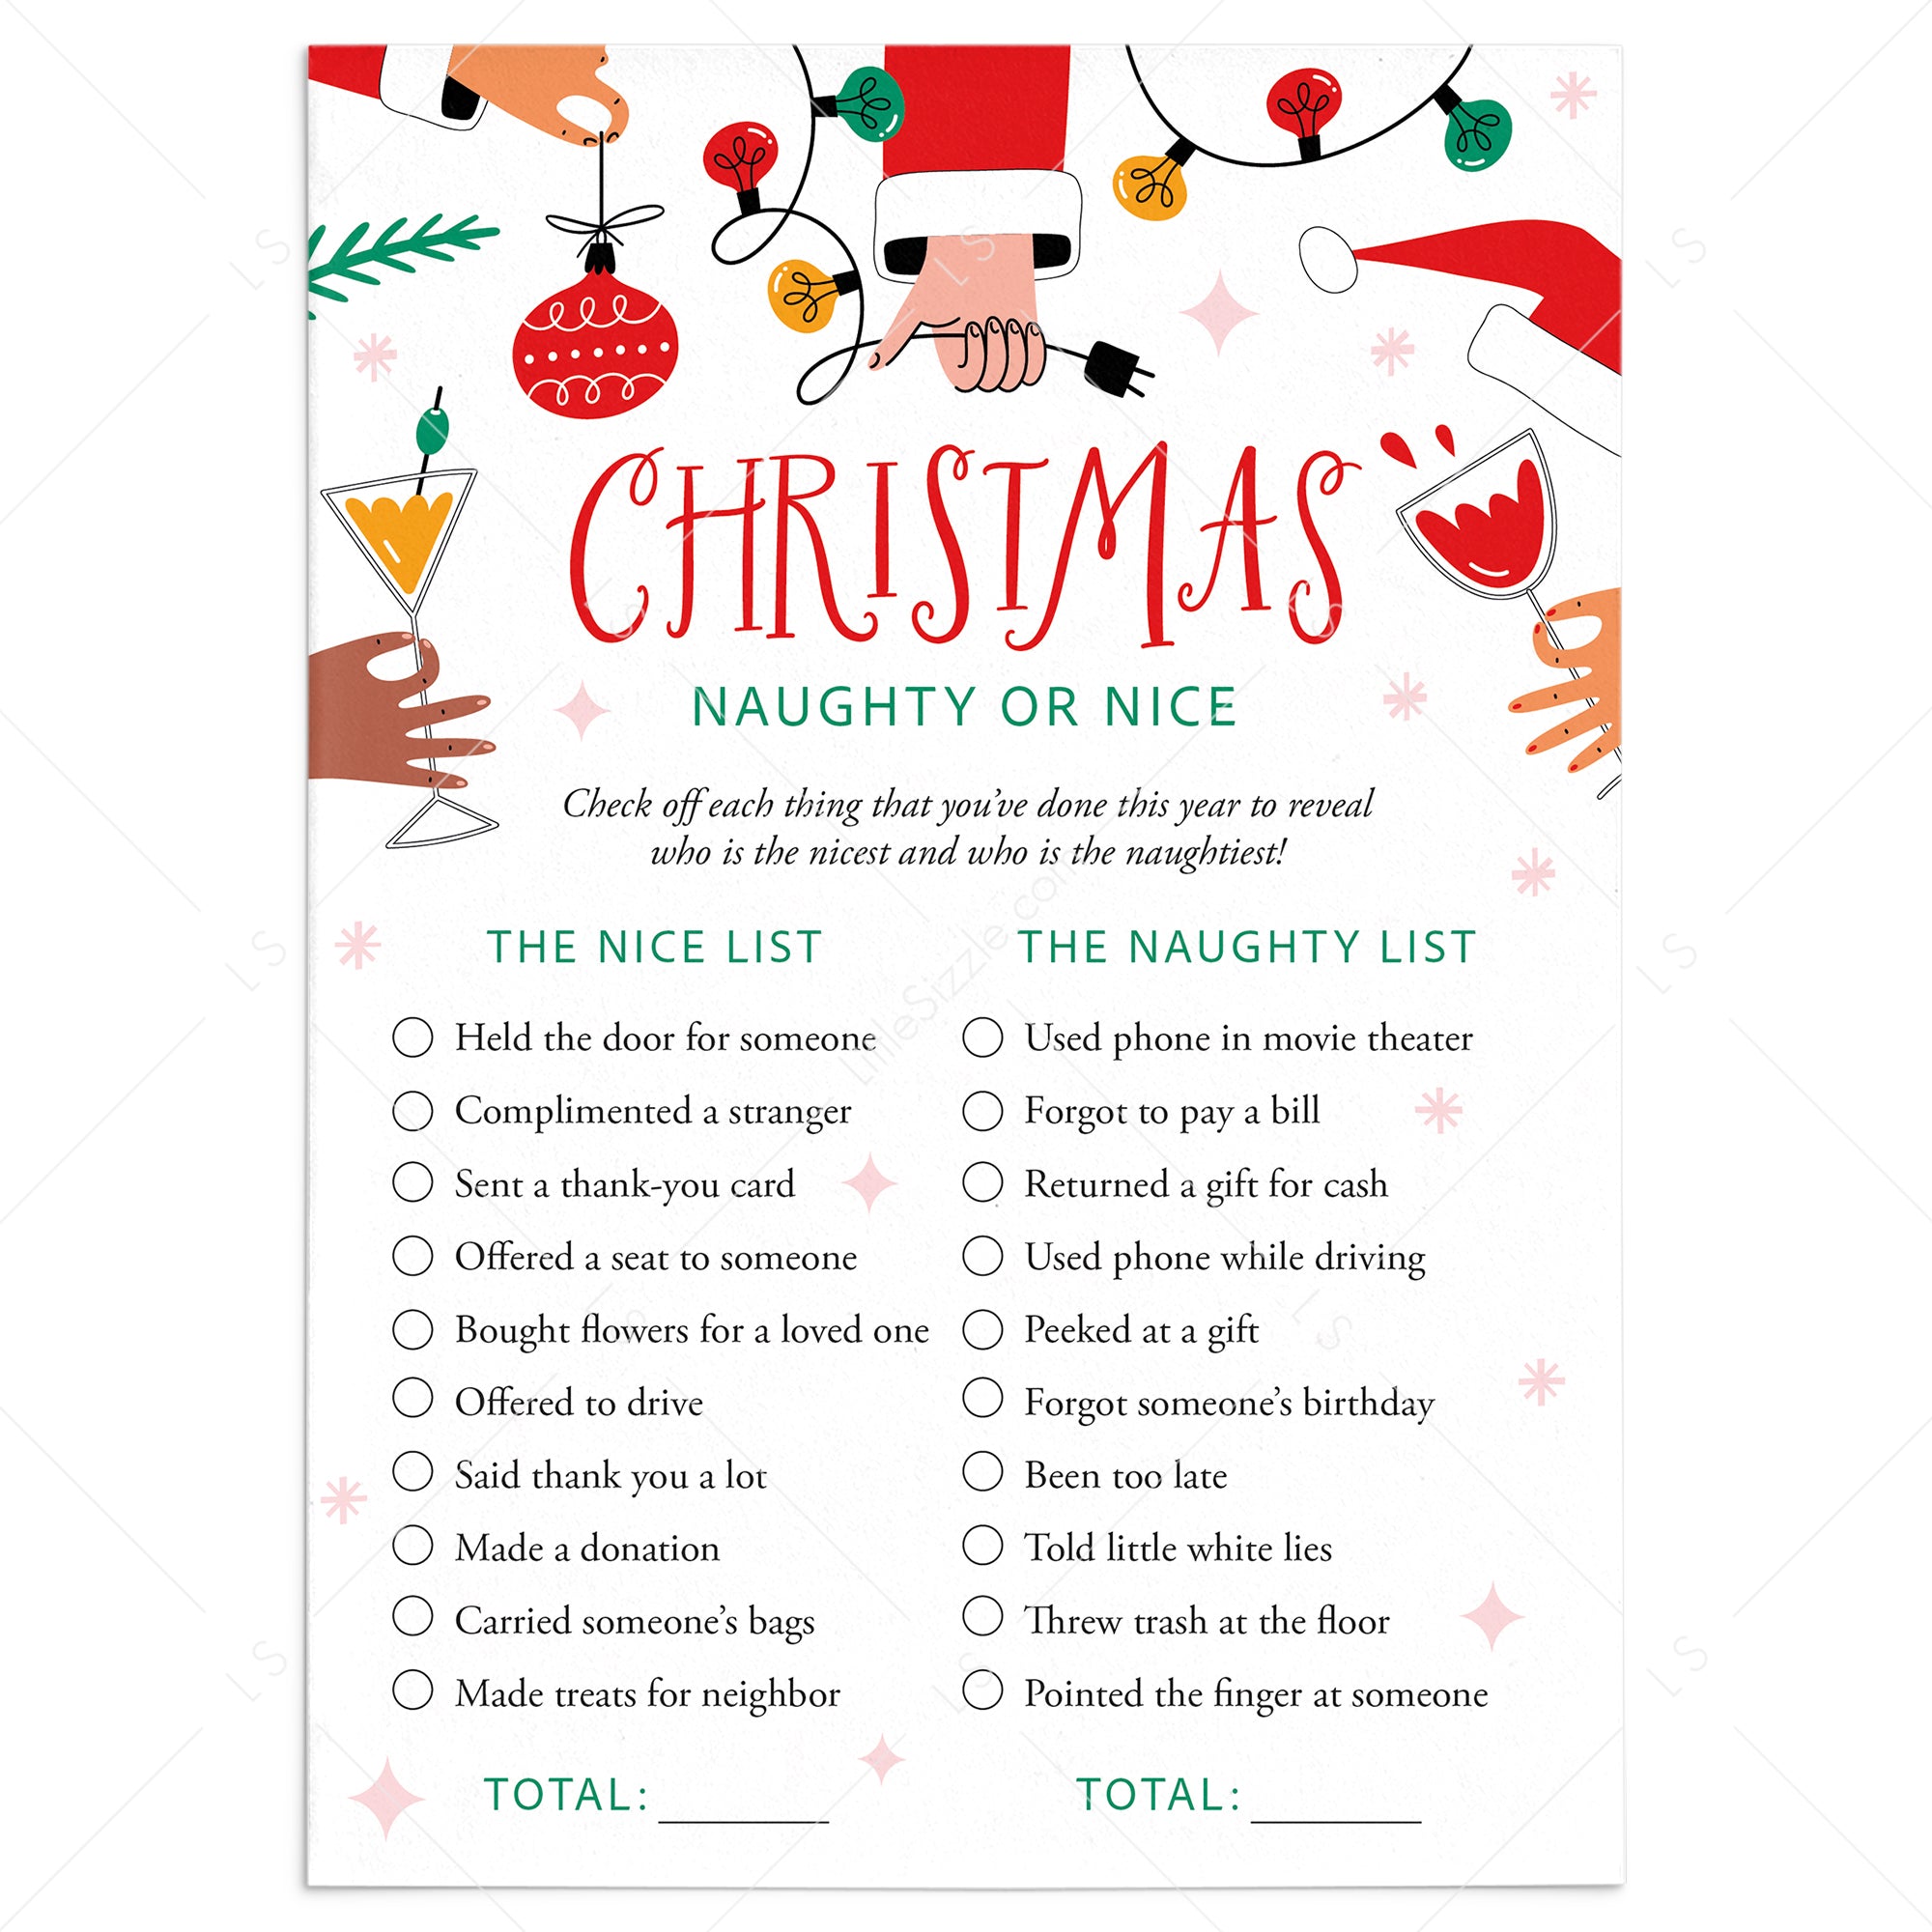 Santa's Naughty or Nice List for Adults Printable by LittleSizzle